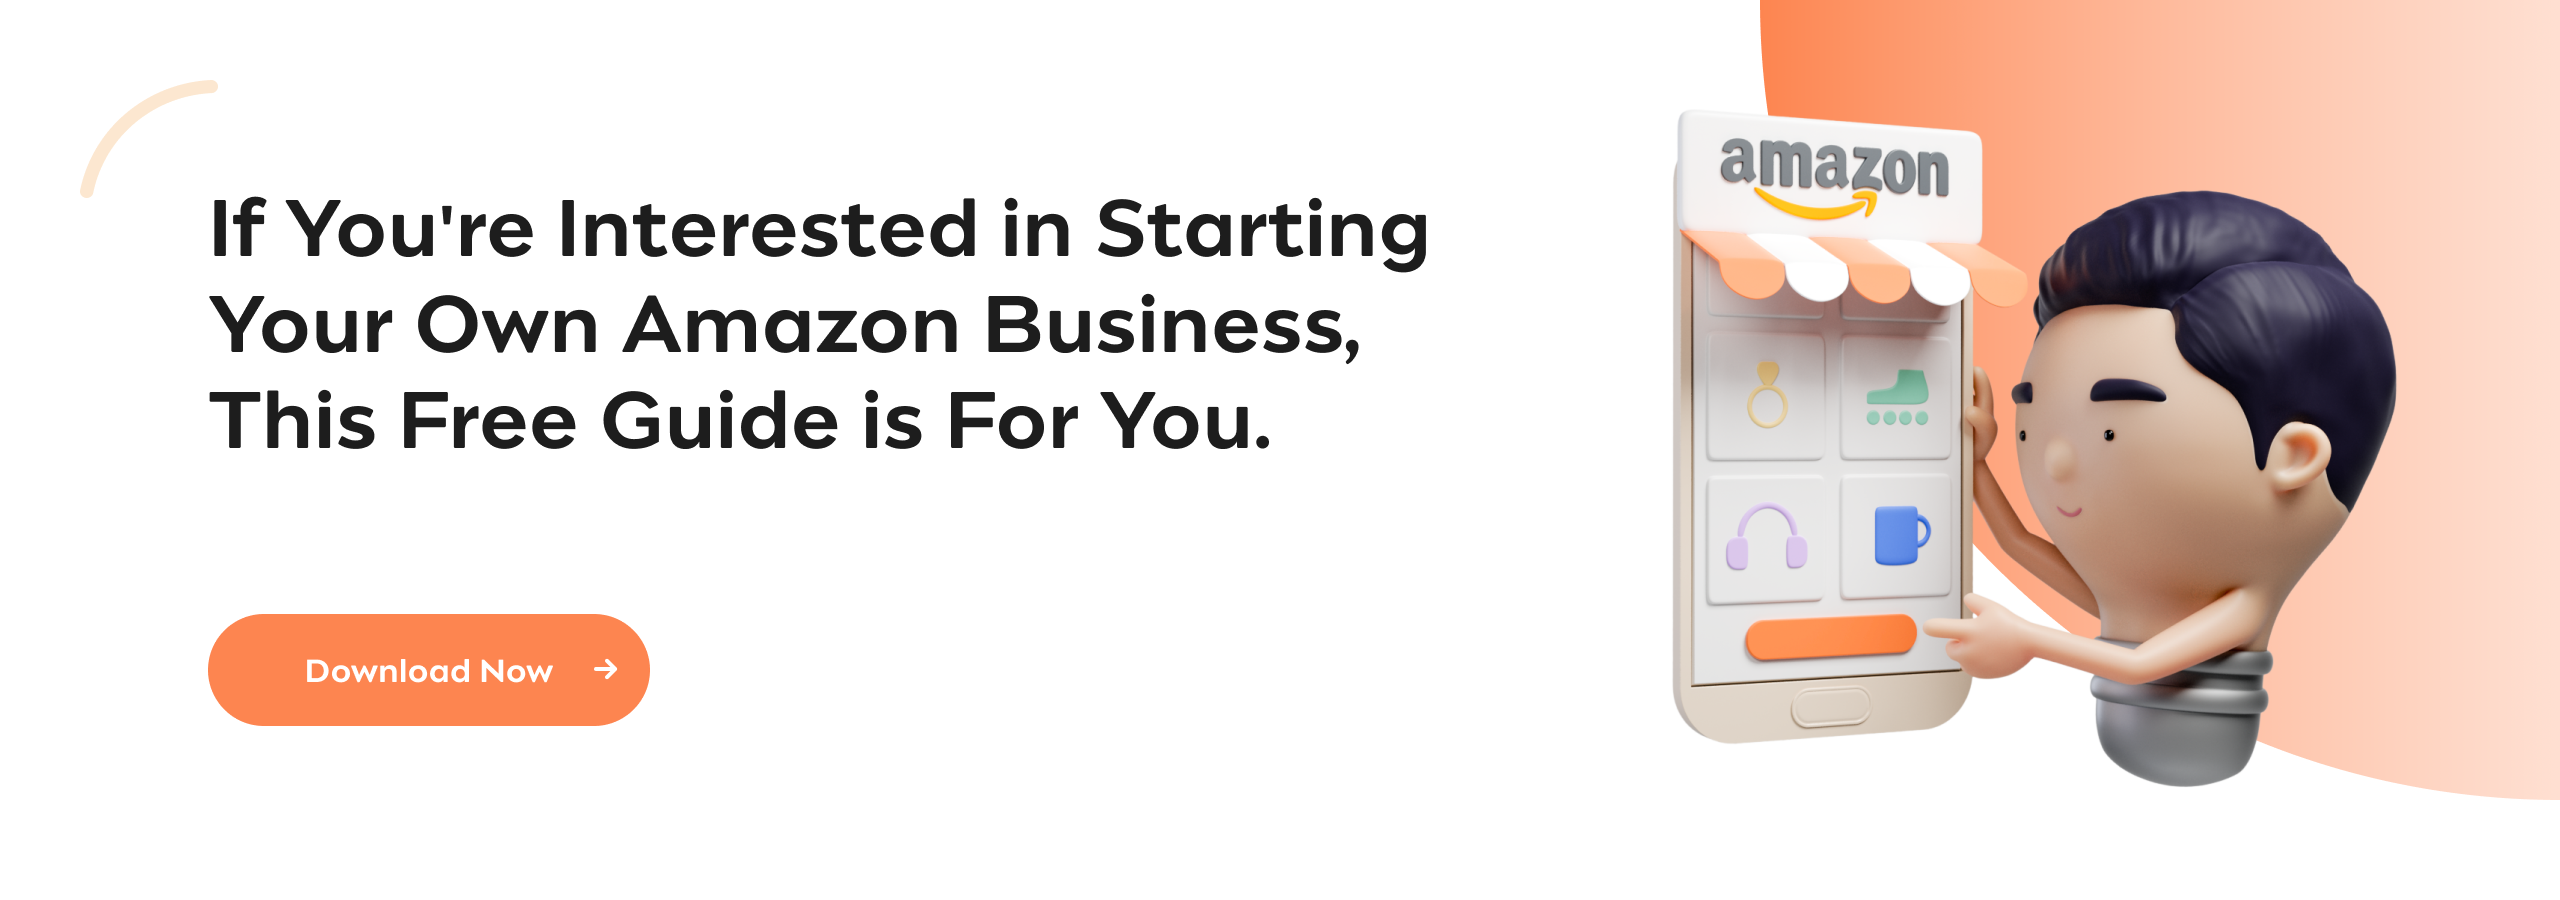 If You're Interested in Starting Your Own Amazon Business, This Free Guide is For You. 